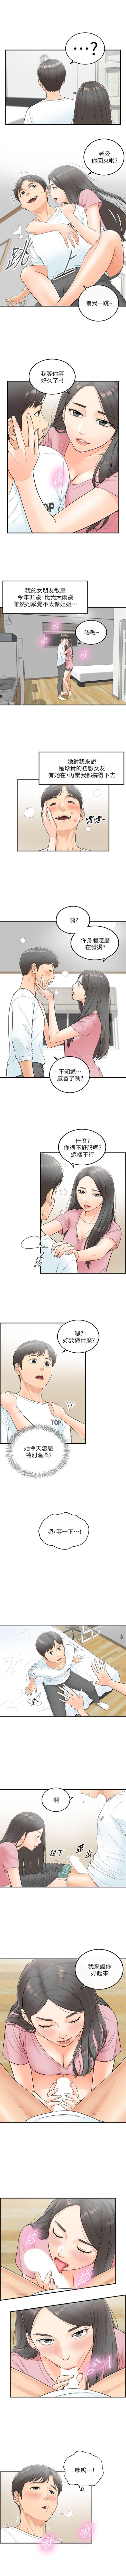 Load 正妹小主管 1-45 官方中文（連載中） Candid - Page 5